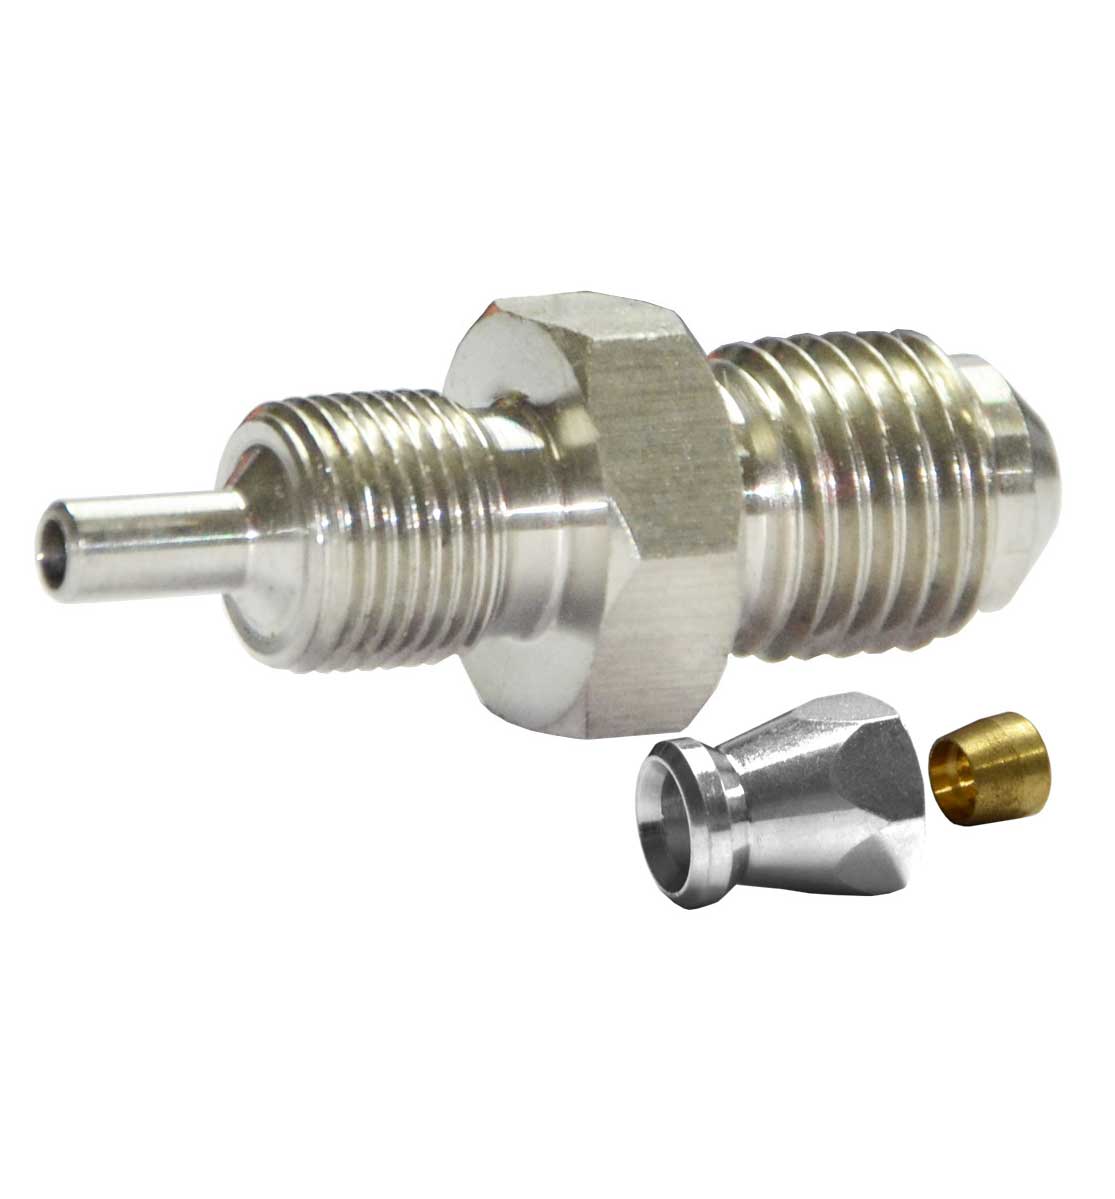 7/16" UNF Male Convex Fitting for AN-3 (3/16") - Stainless Steel